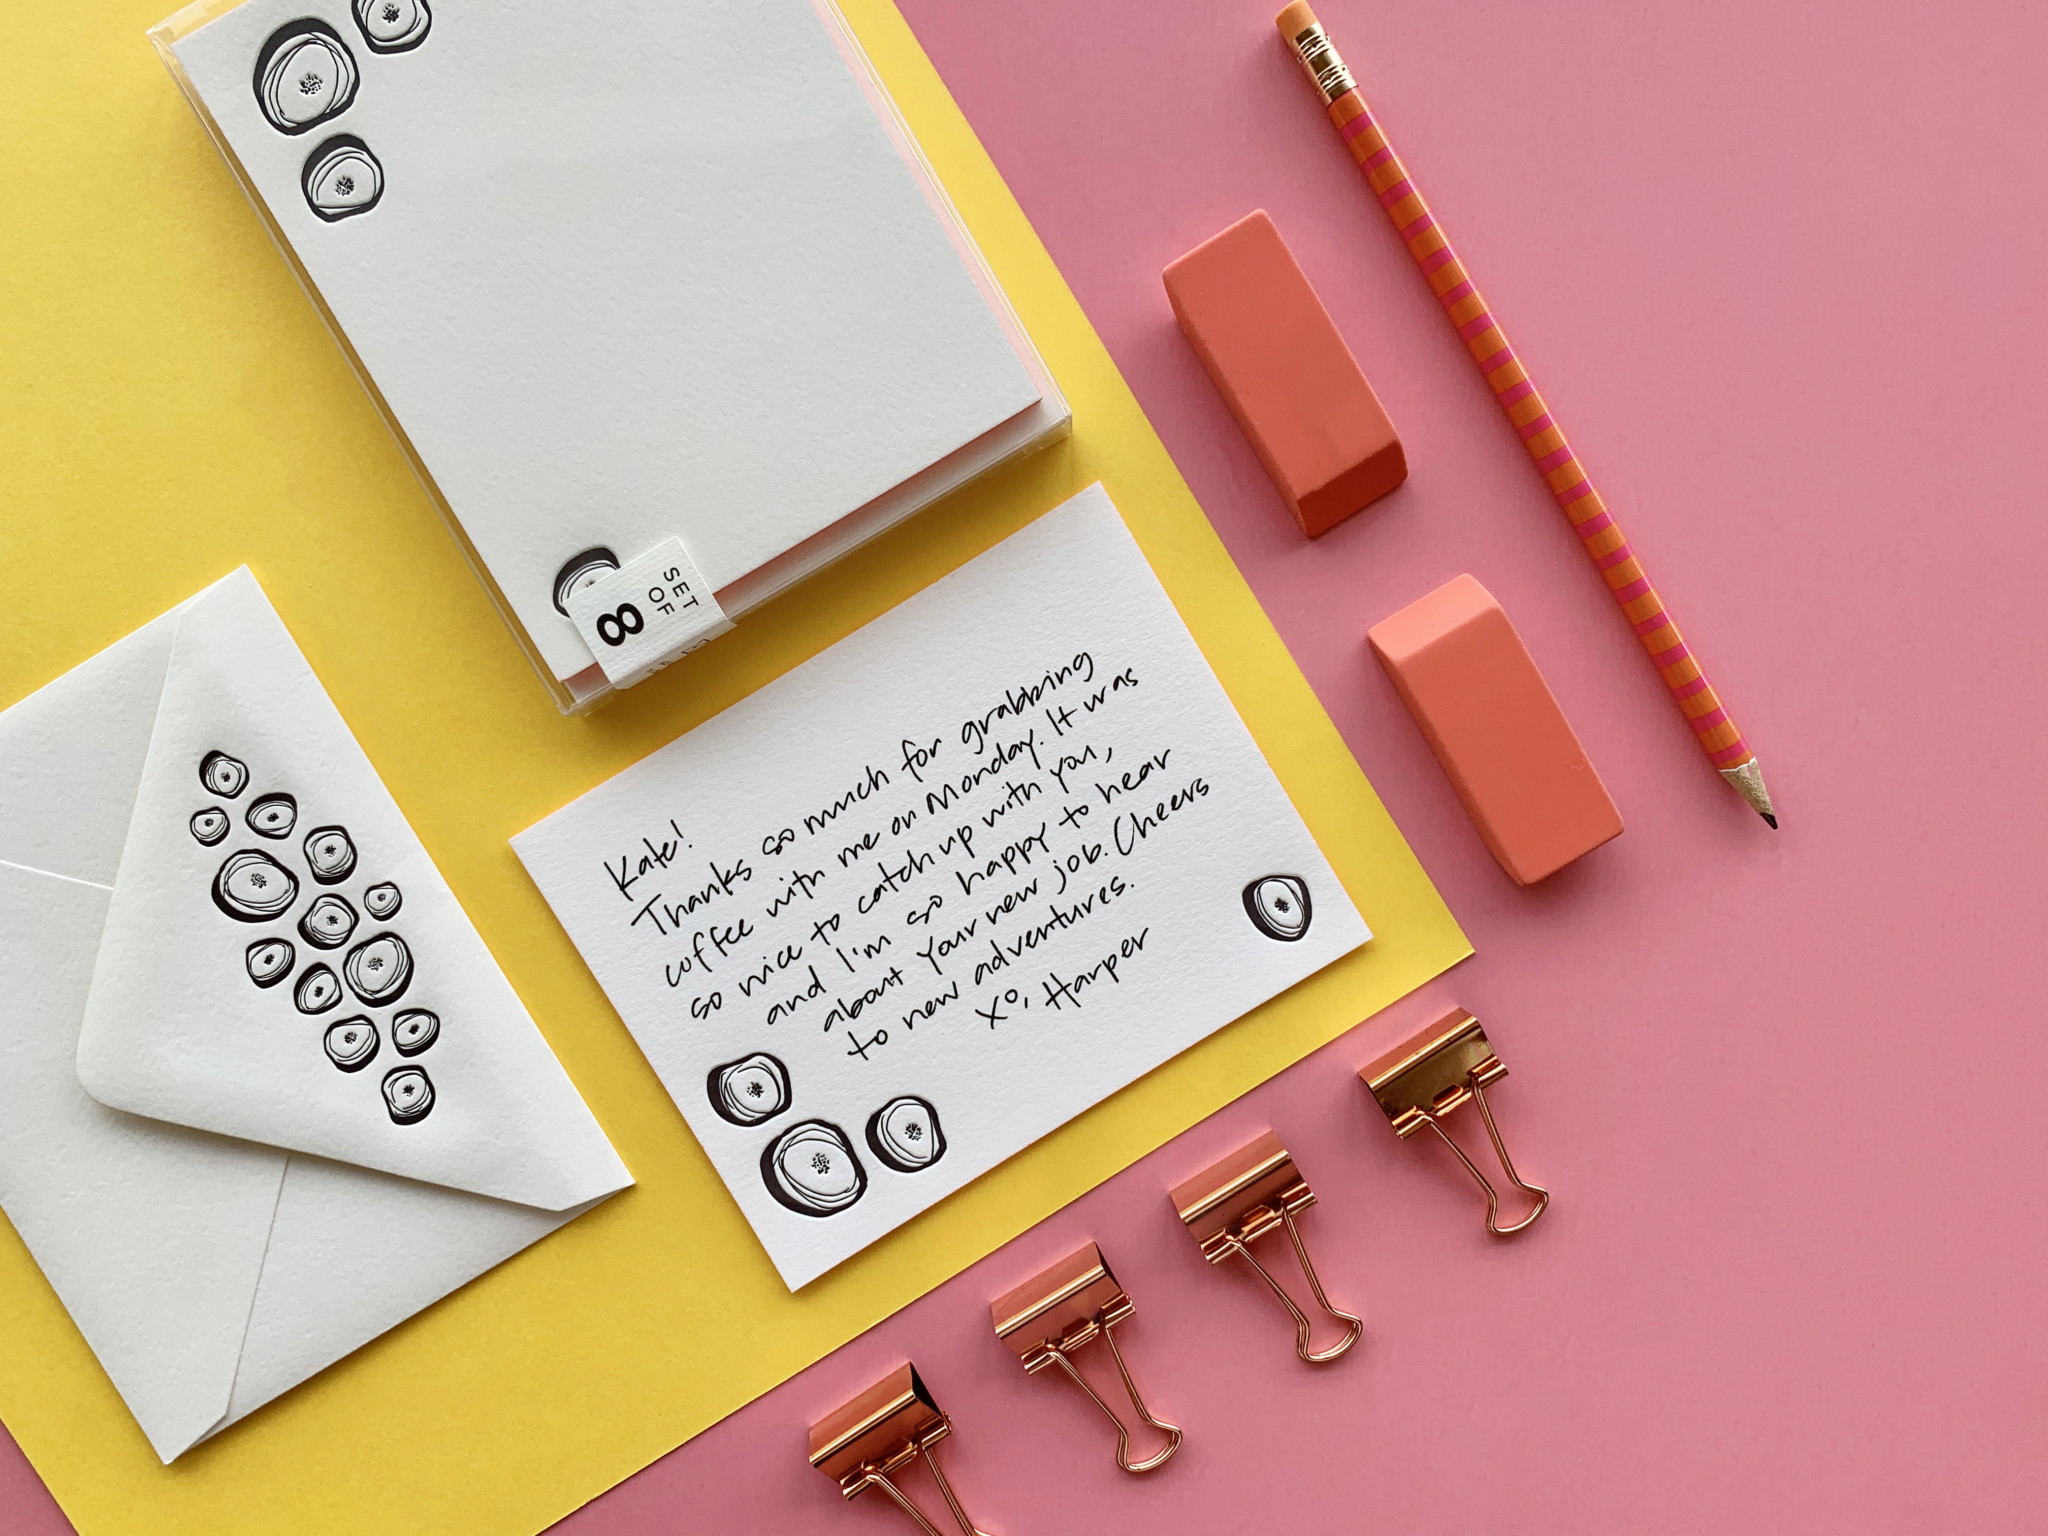 Letterpress printed social stationery set shows product with a handwritten note